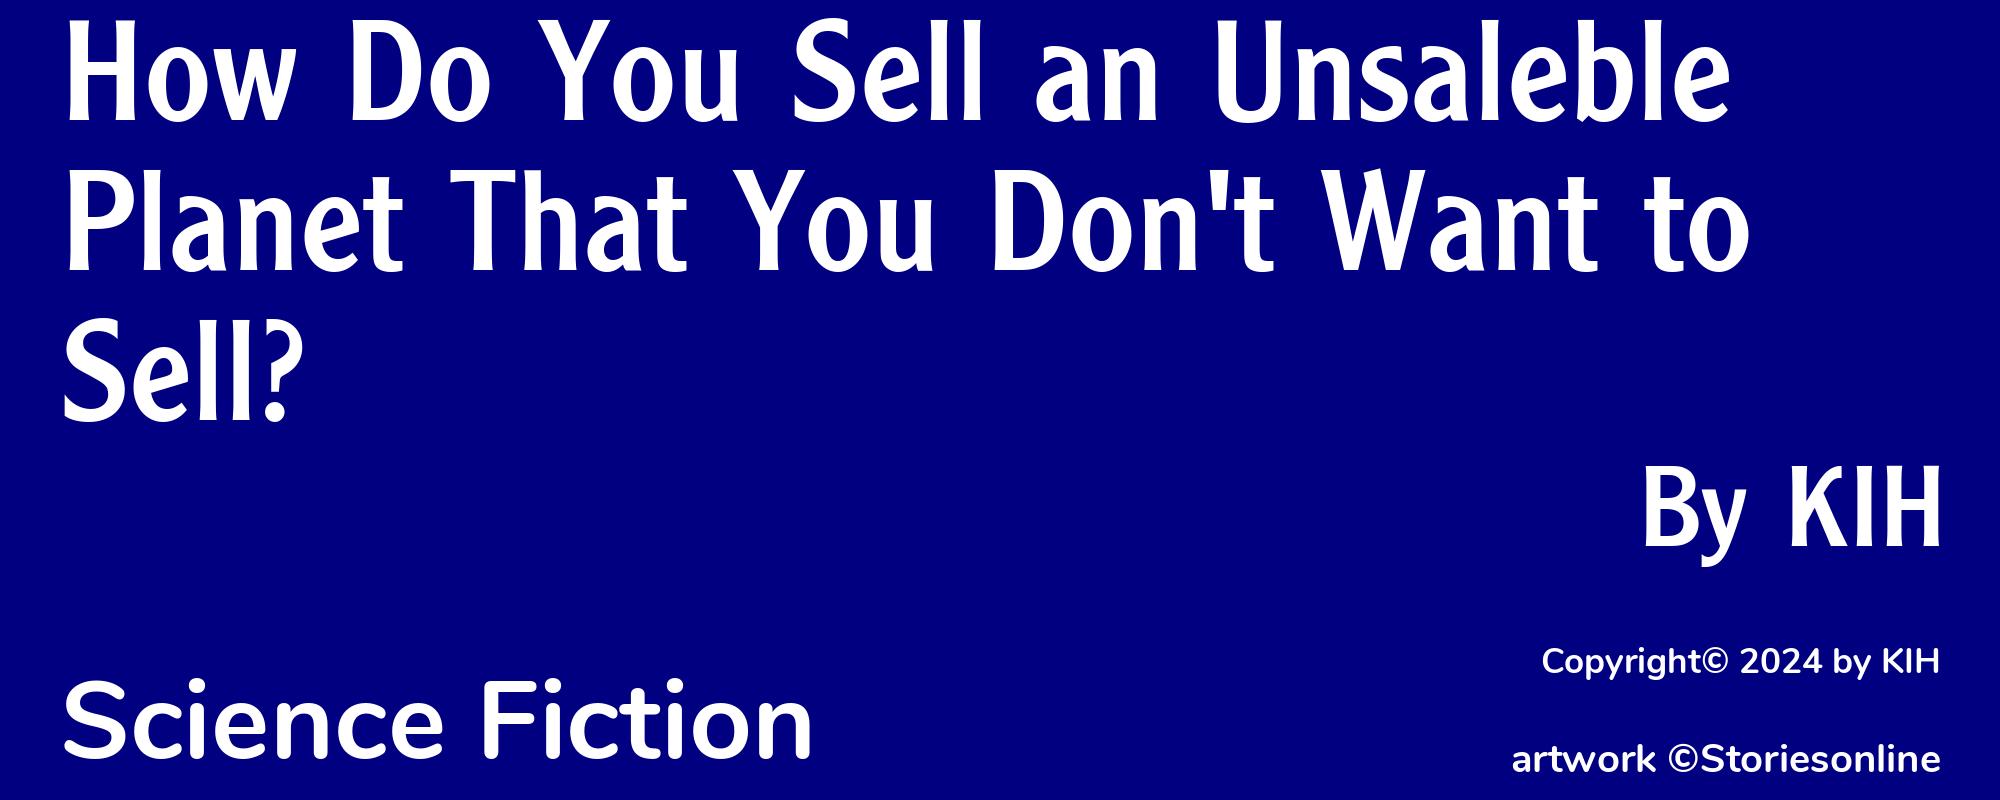 How Do You Sell an Unsaleble Planet That You Don't Want to Sell? - Cover